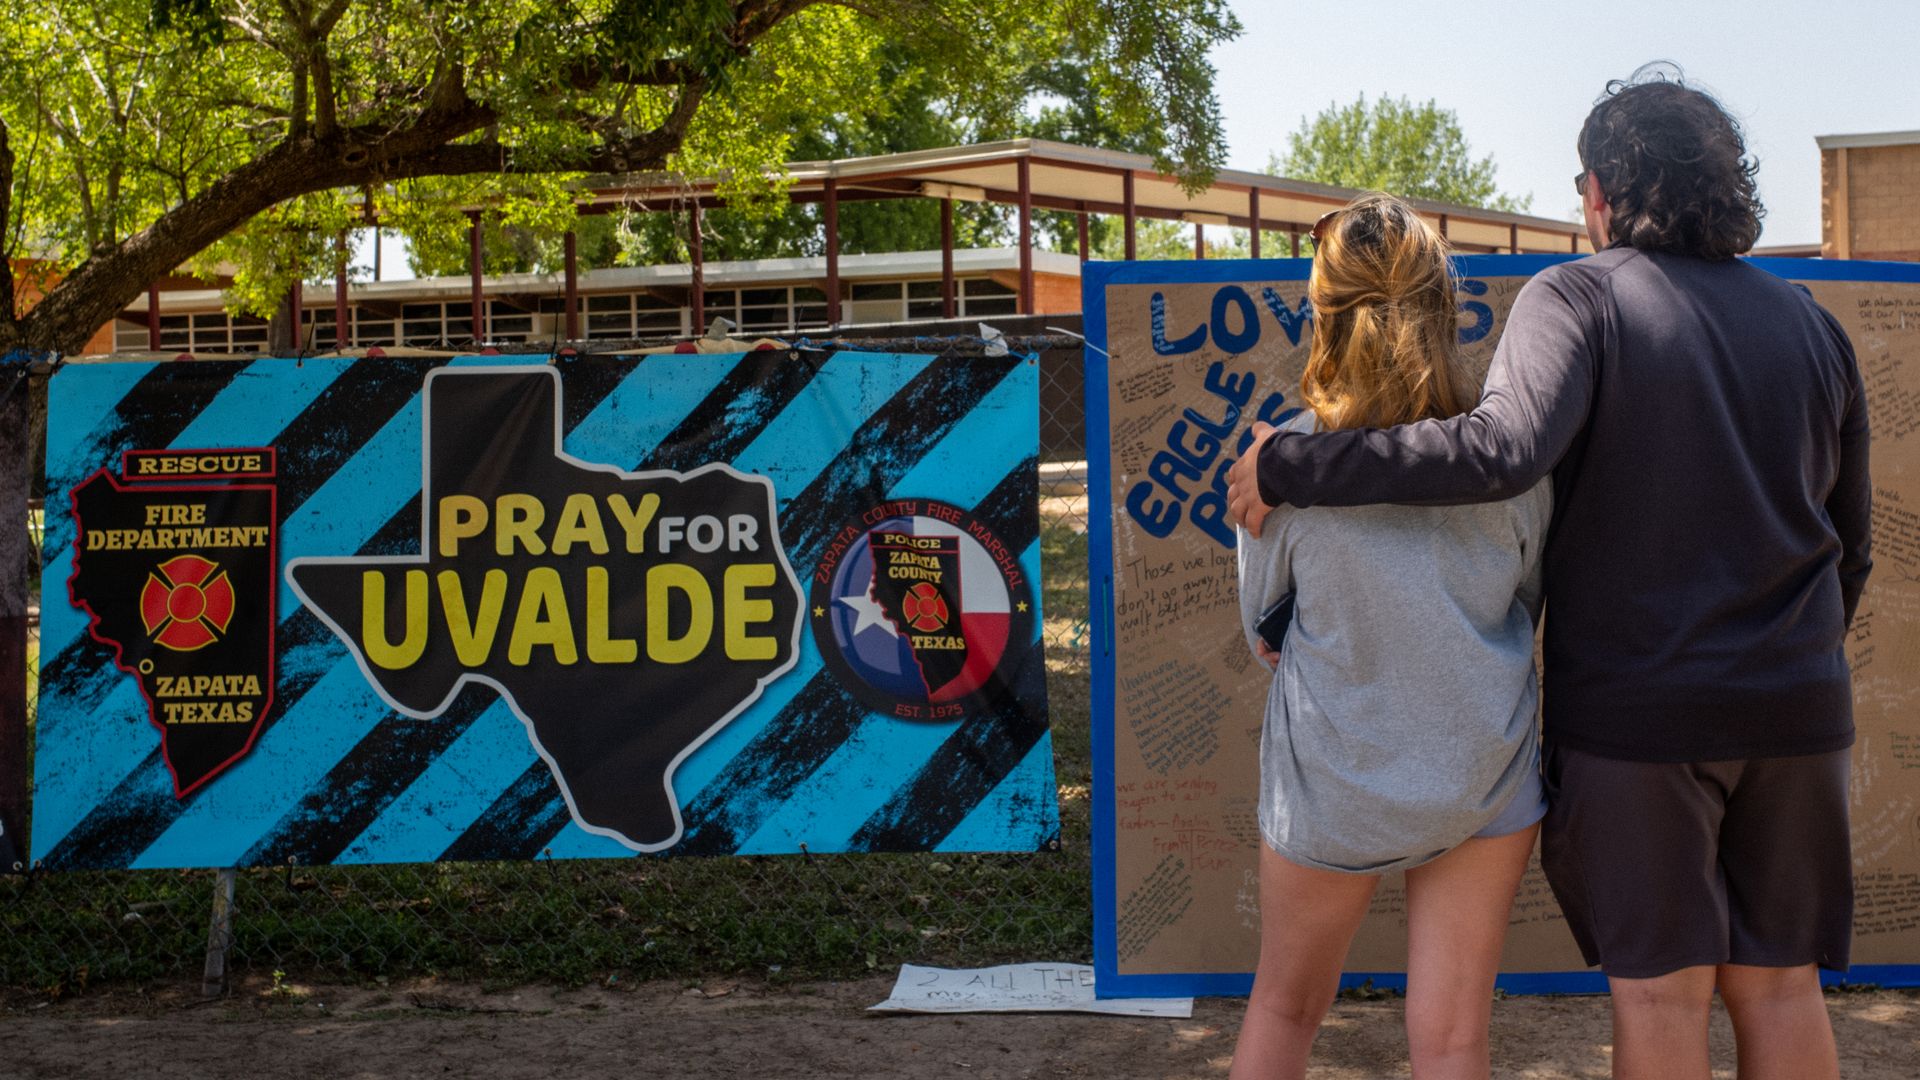 Photo of a sign that says "Pray for Uvalde"